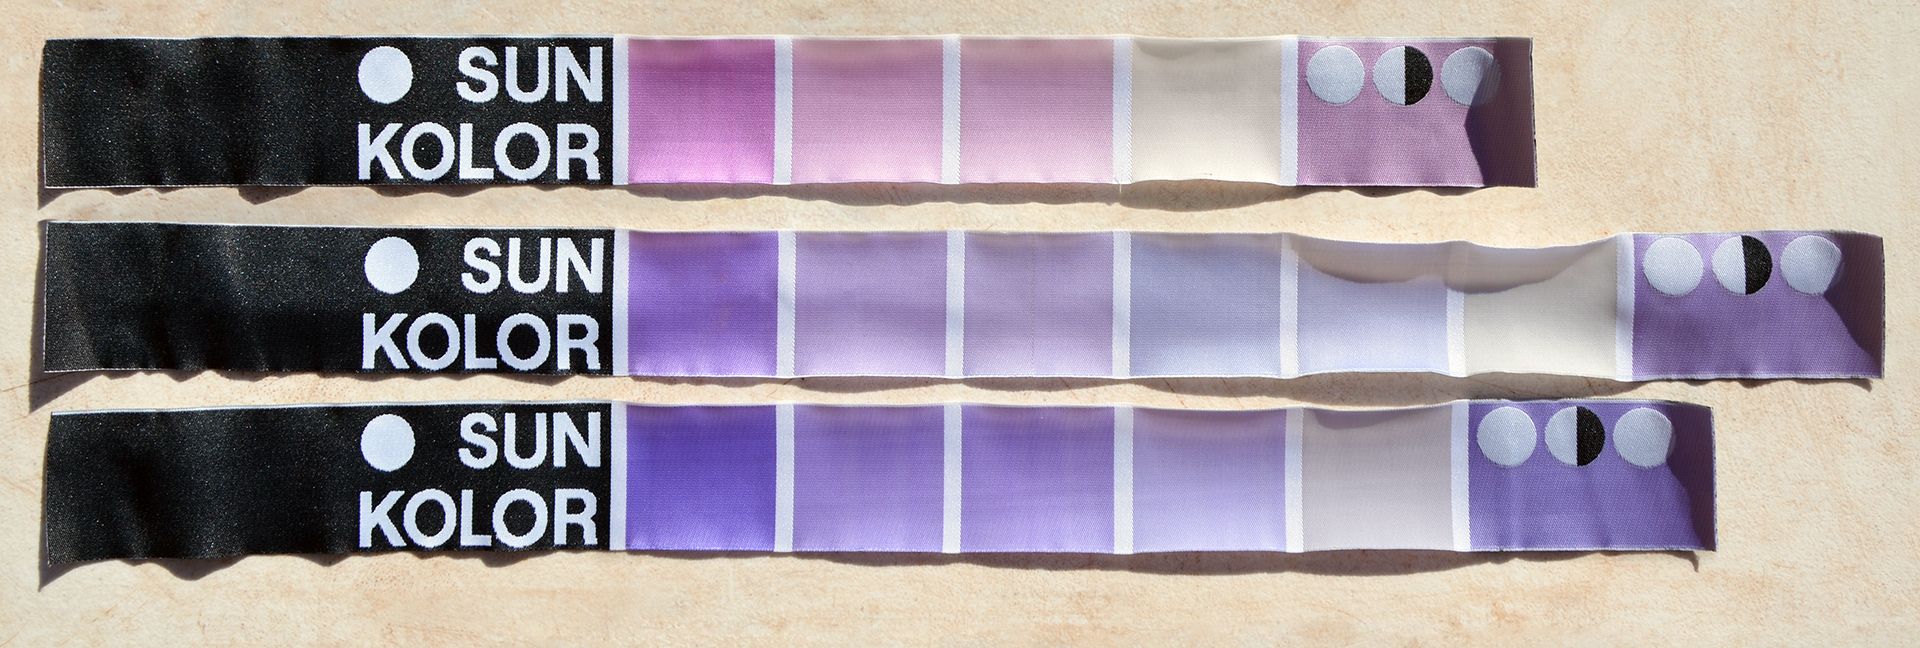 Three fabric strips from sun kolor with colour palettes ranging from pink to beige and light purple.